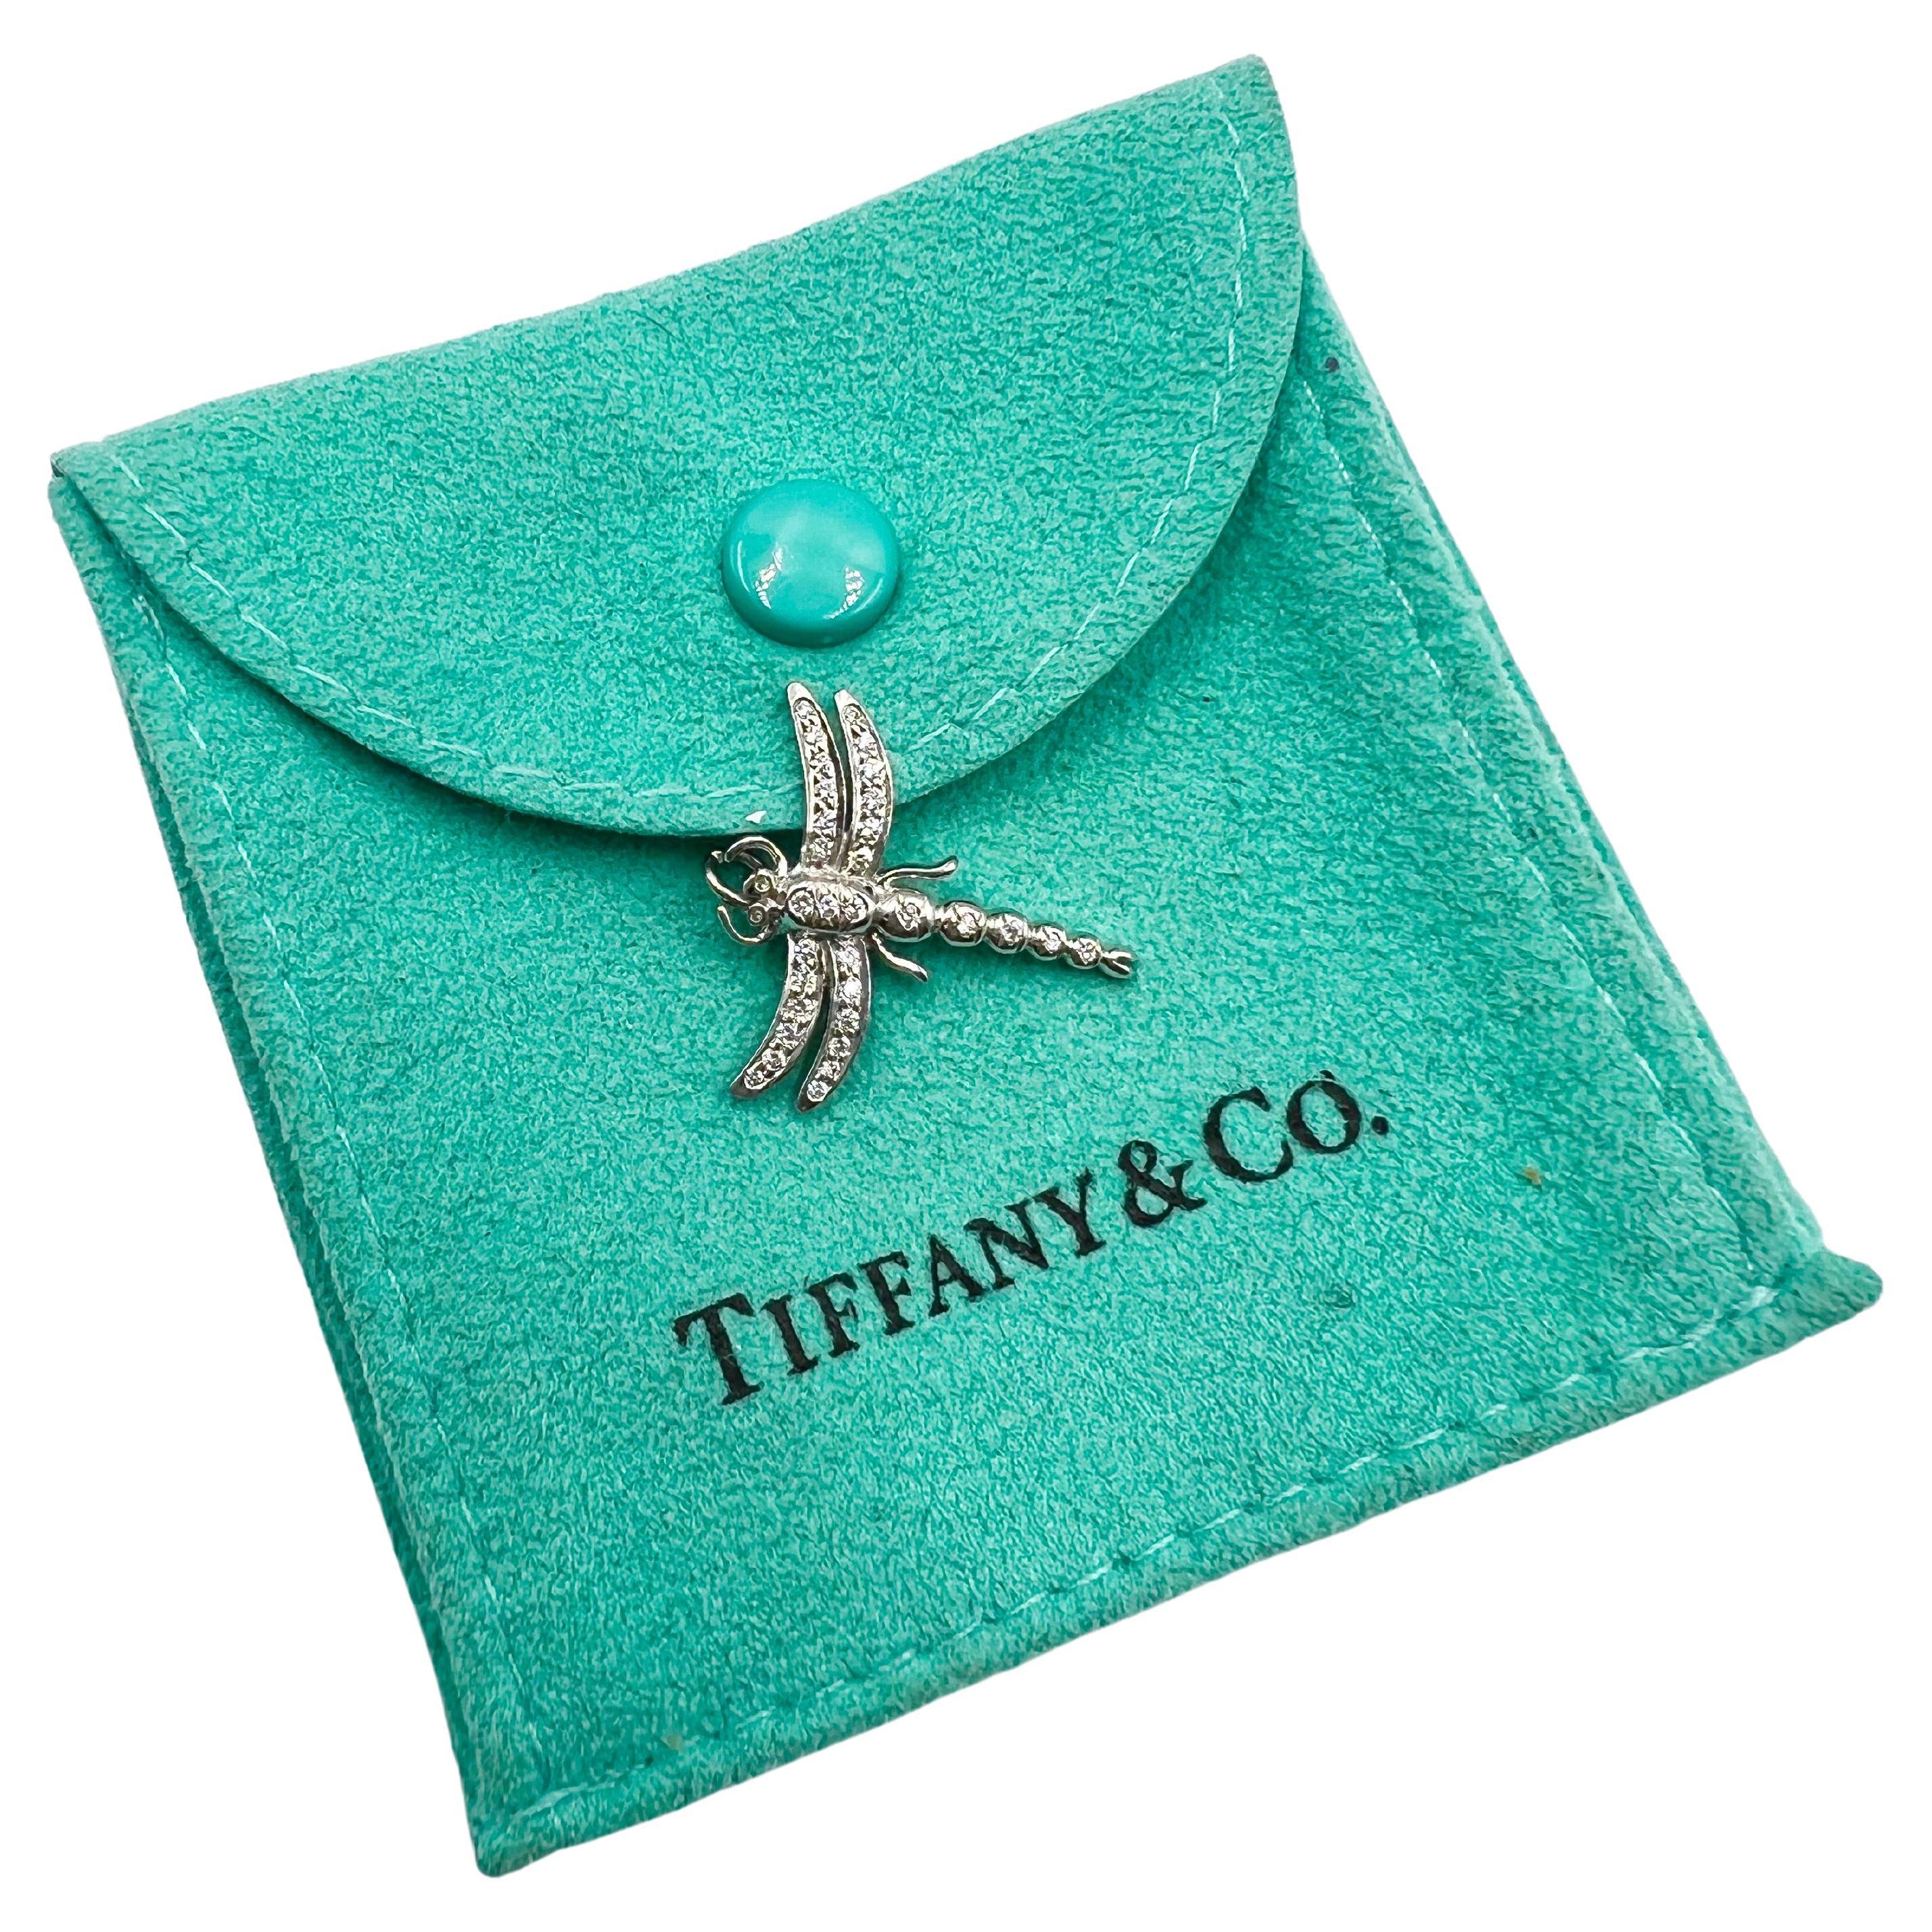 Adorable Tiffany & Co. dragonfly pendant charm in platinum and pave' set with round brilliant diamonds throughout the wings and body.  The dragonfly is delicately articulated with double wings, body and eyes all set with small round brilliant cut